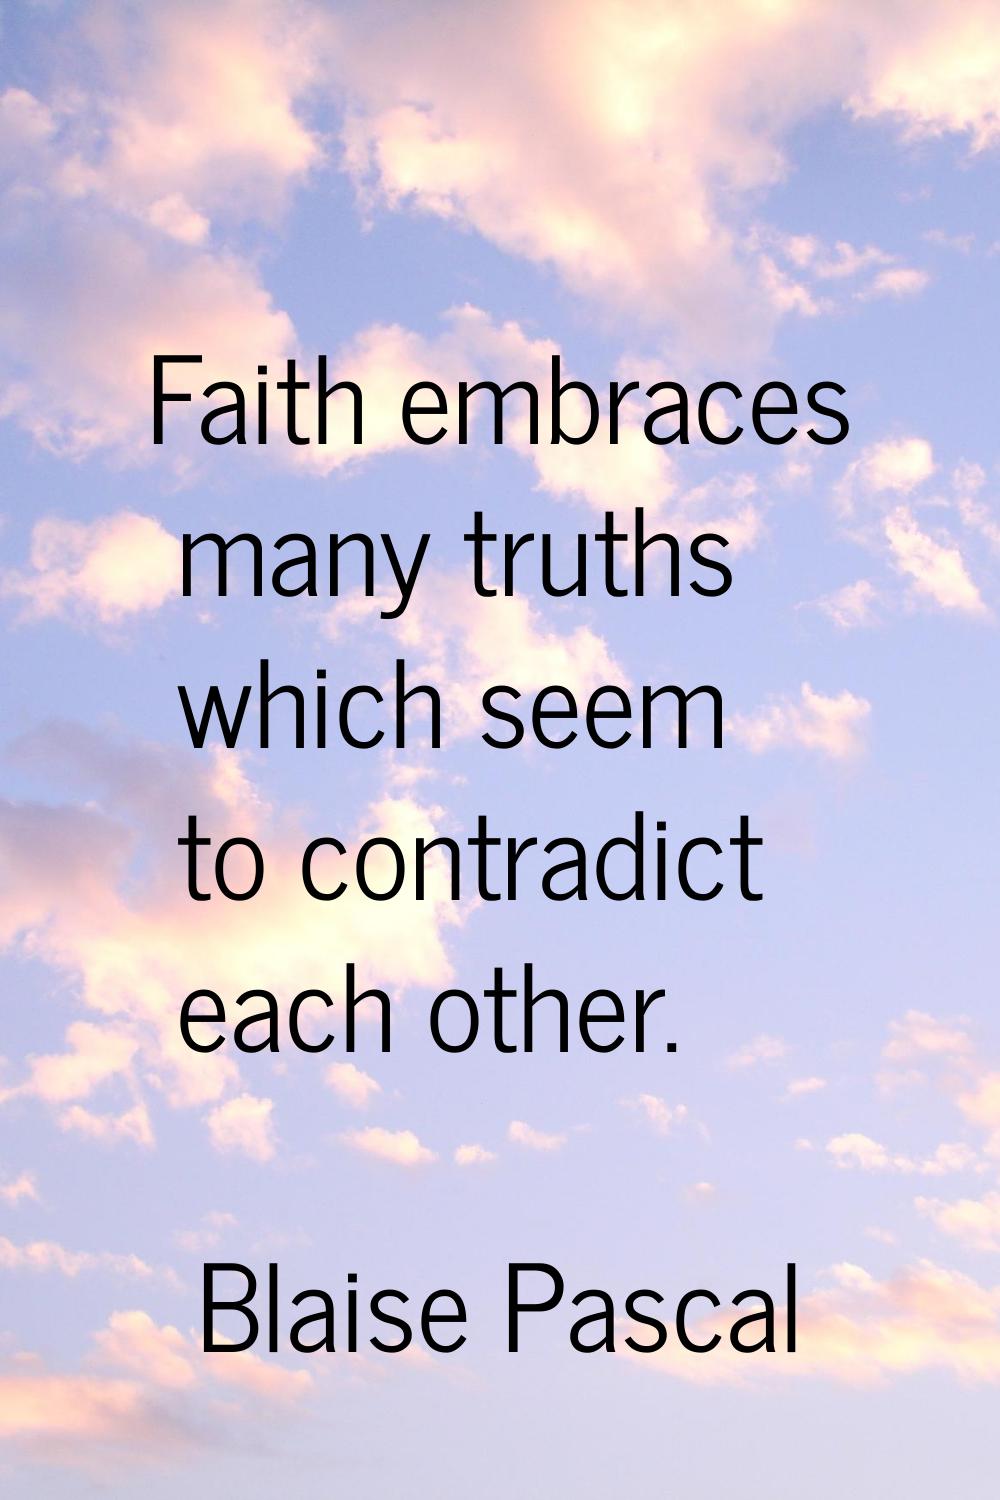 Faith embraces many truths which seem to contradict each other.